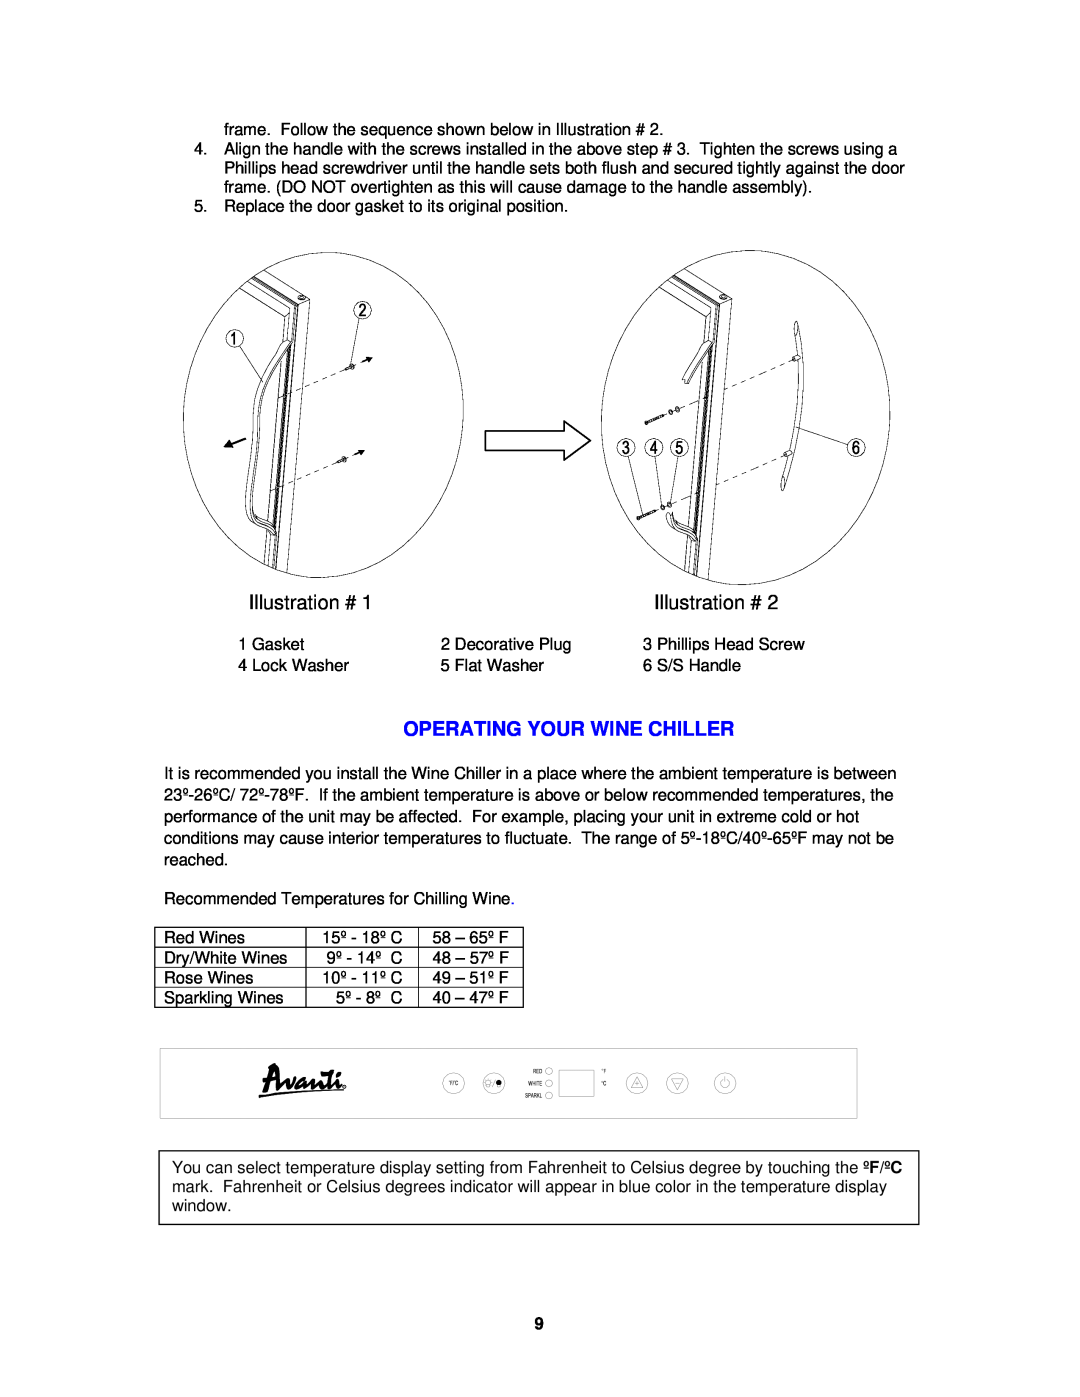 Avanti WC1500DSS instruction manual Illustration #, Operating Your Wine Chiller, Phillips Head Screw 